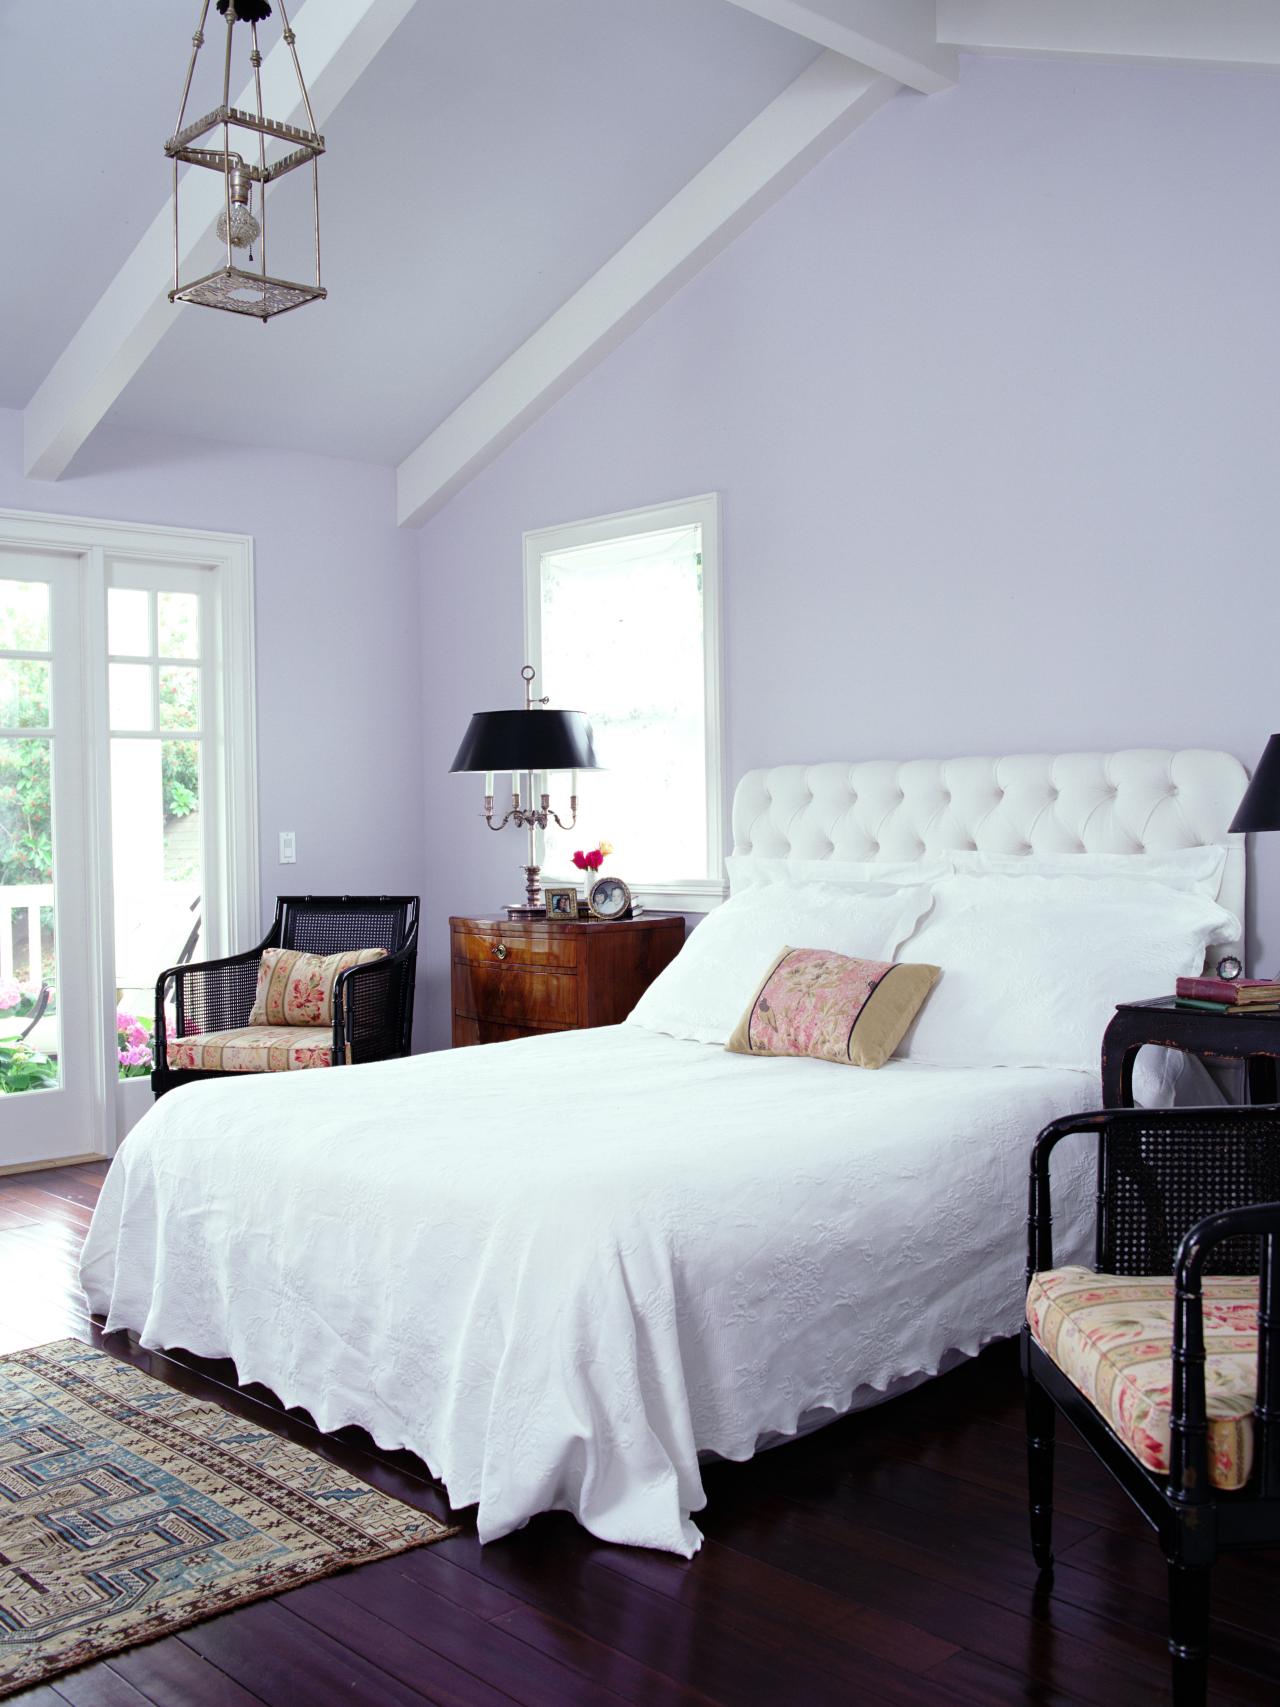 Transitional Bedroom With Vaulted Ceiling